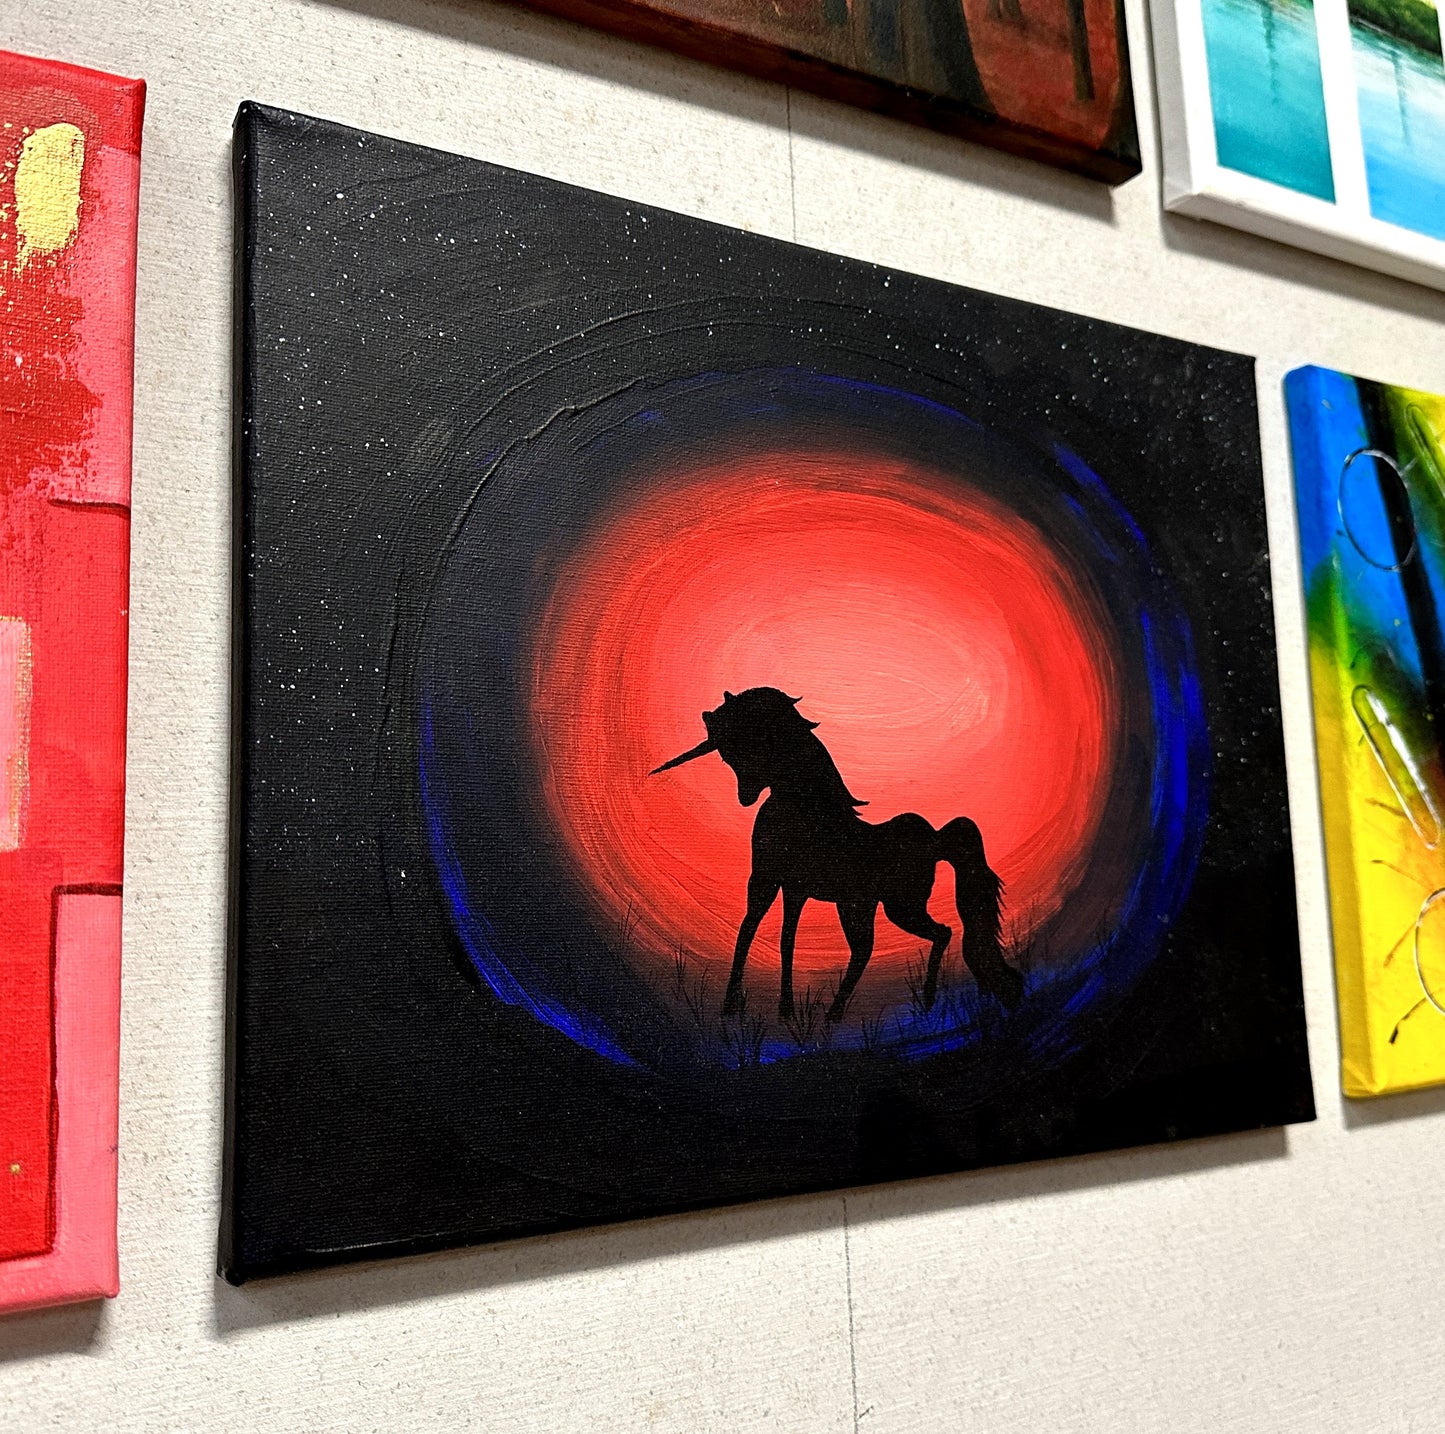 Blood Moon Unicorn Original Acrylic Painting by Andrew Read in North Devon